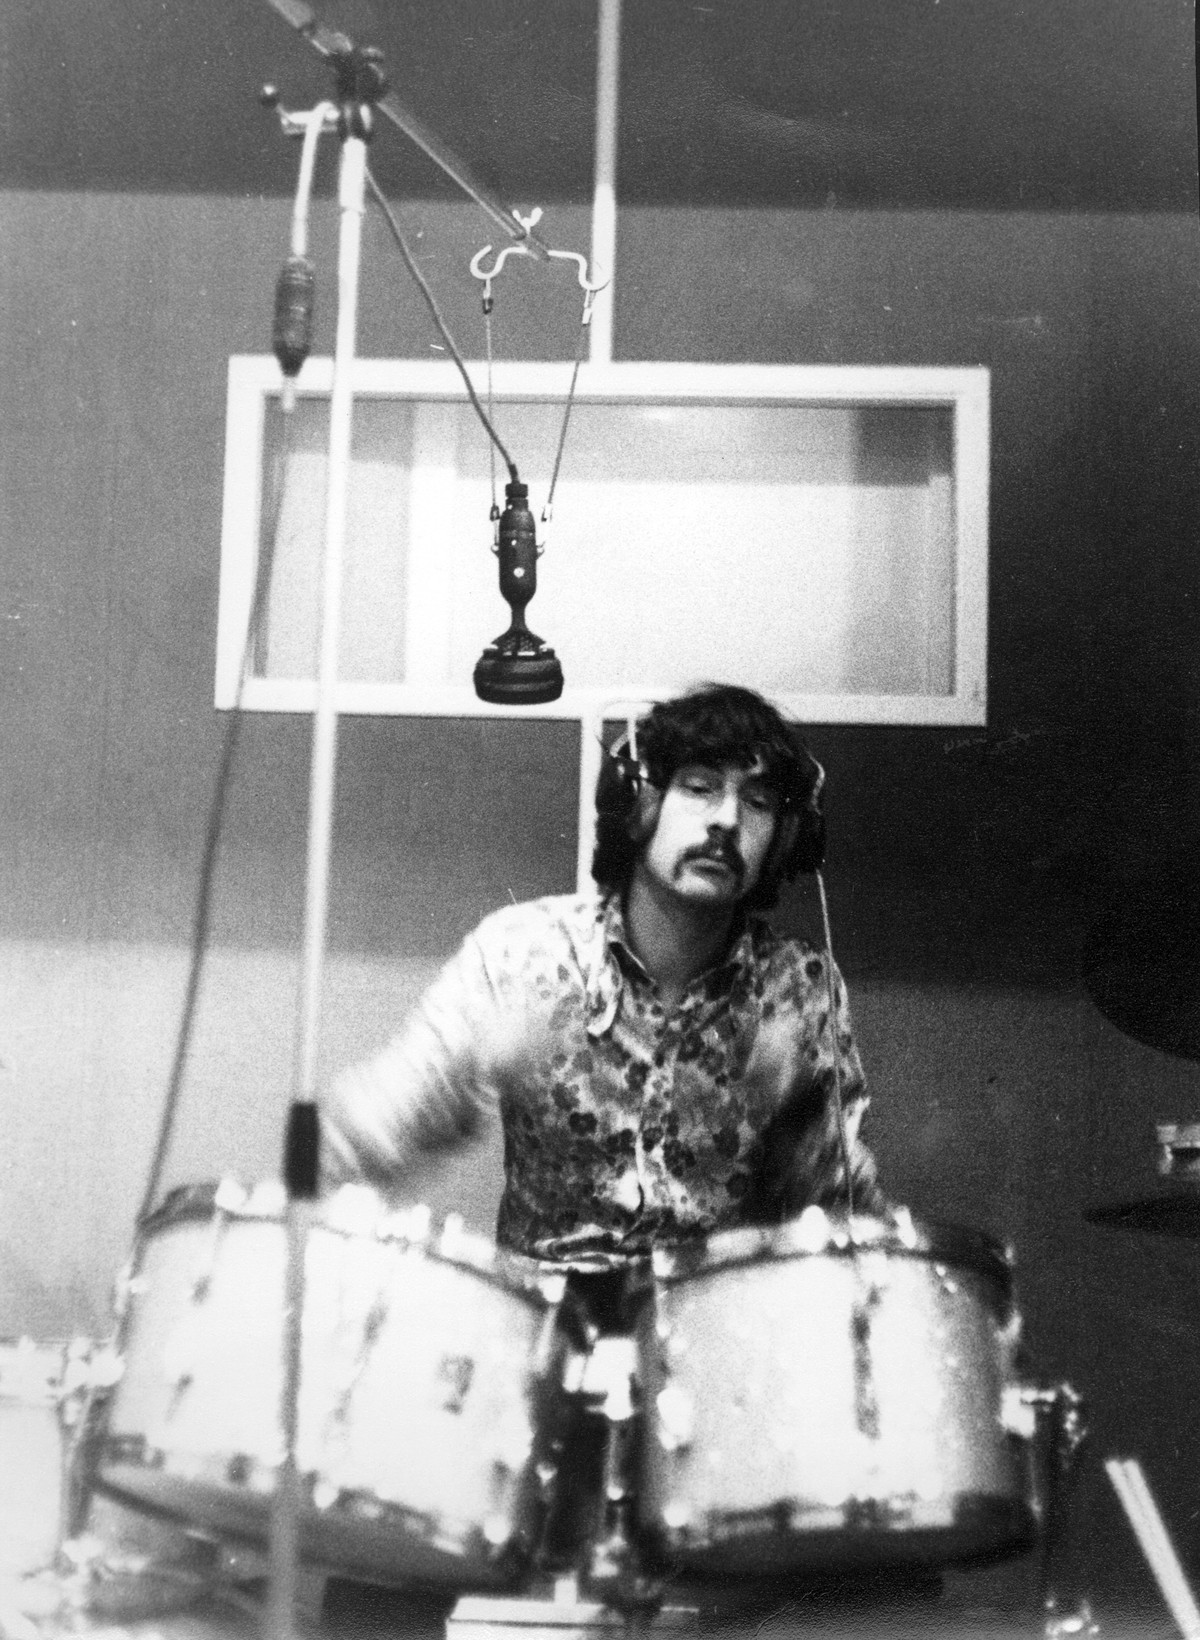 Trampas Mucho bien bueno Explicación Nick Mason: Behind the Scenes with Pink Floyd drummer | Tape Op Magazine |  Longform candid interviews with music producers and audio engineers  covering mixing, mastering, recording and music production.